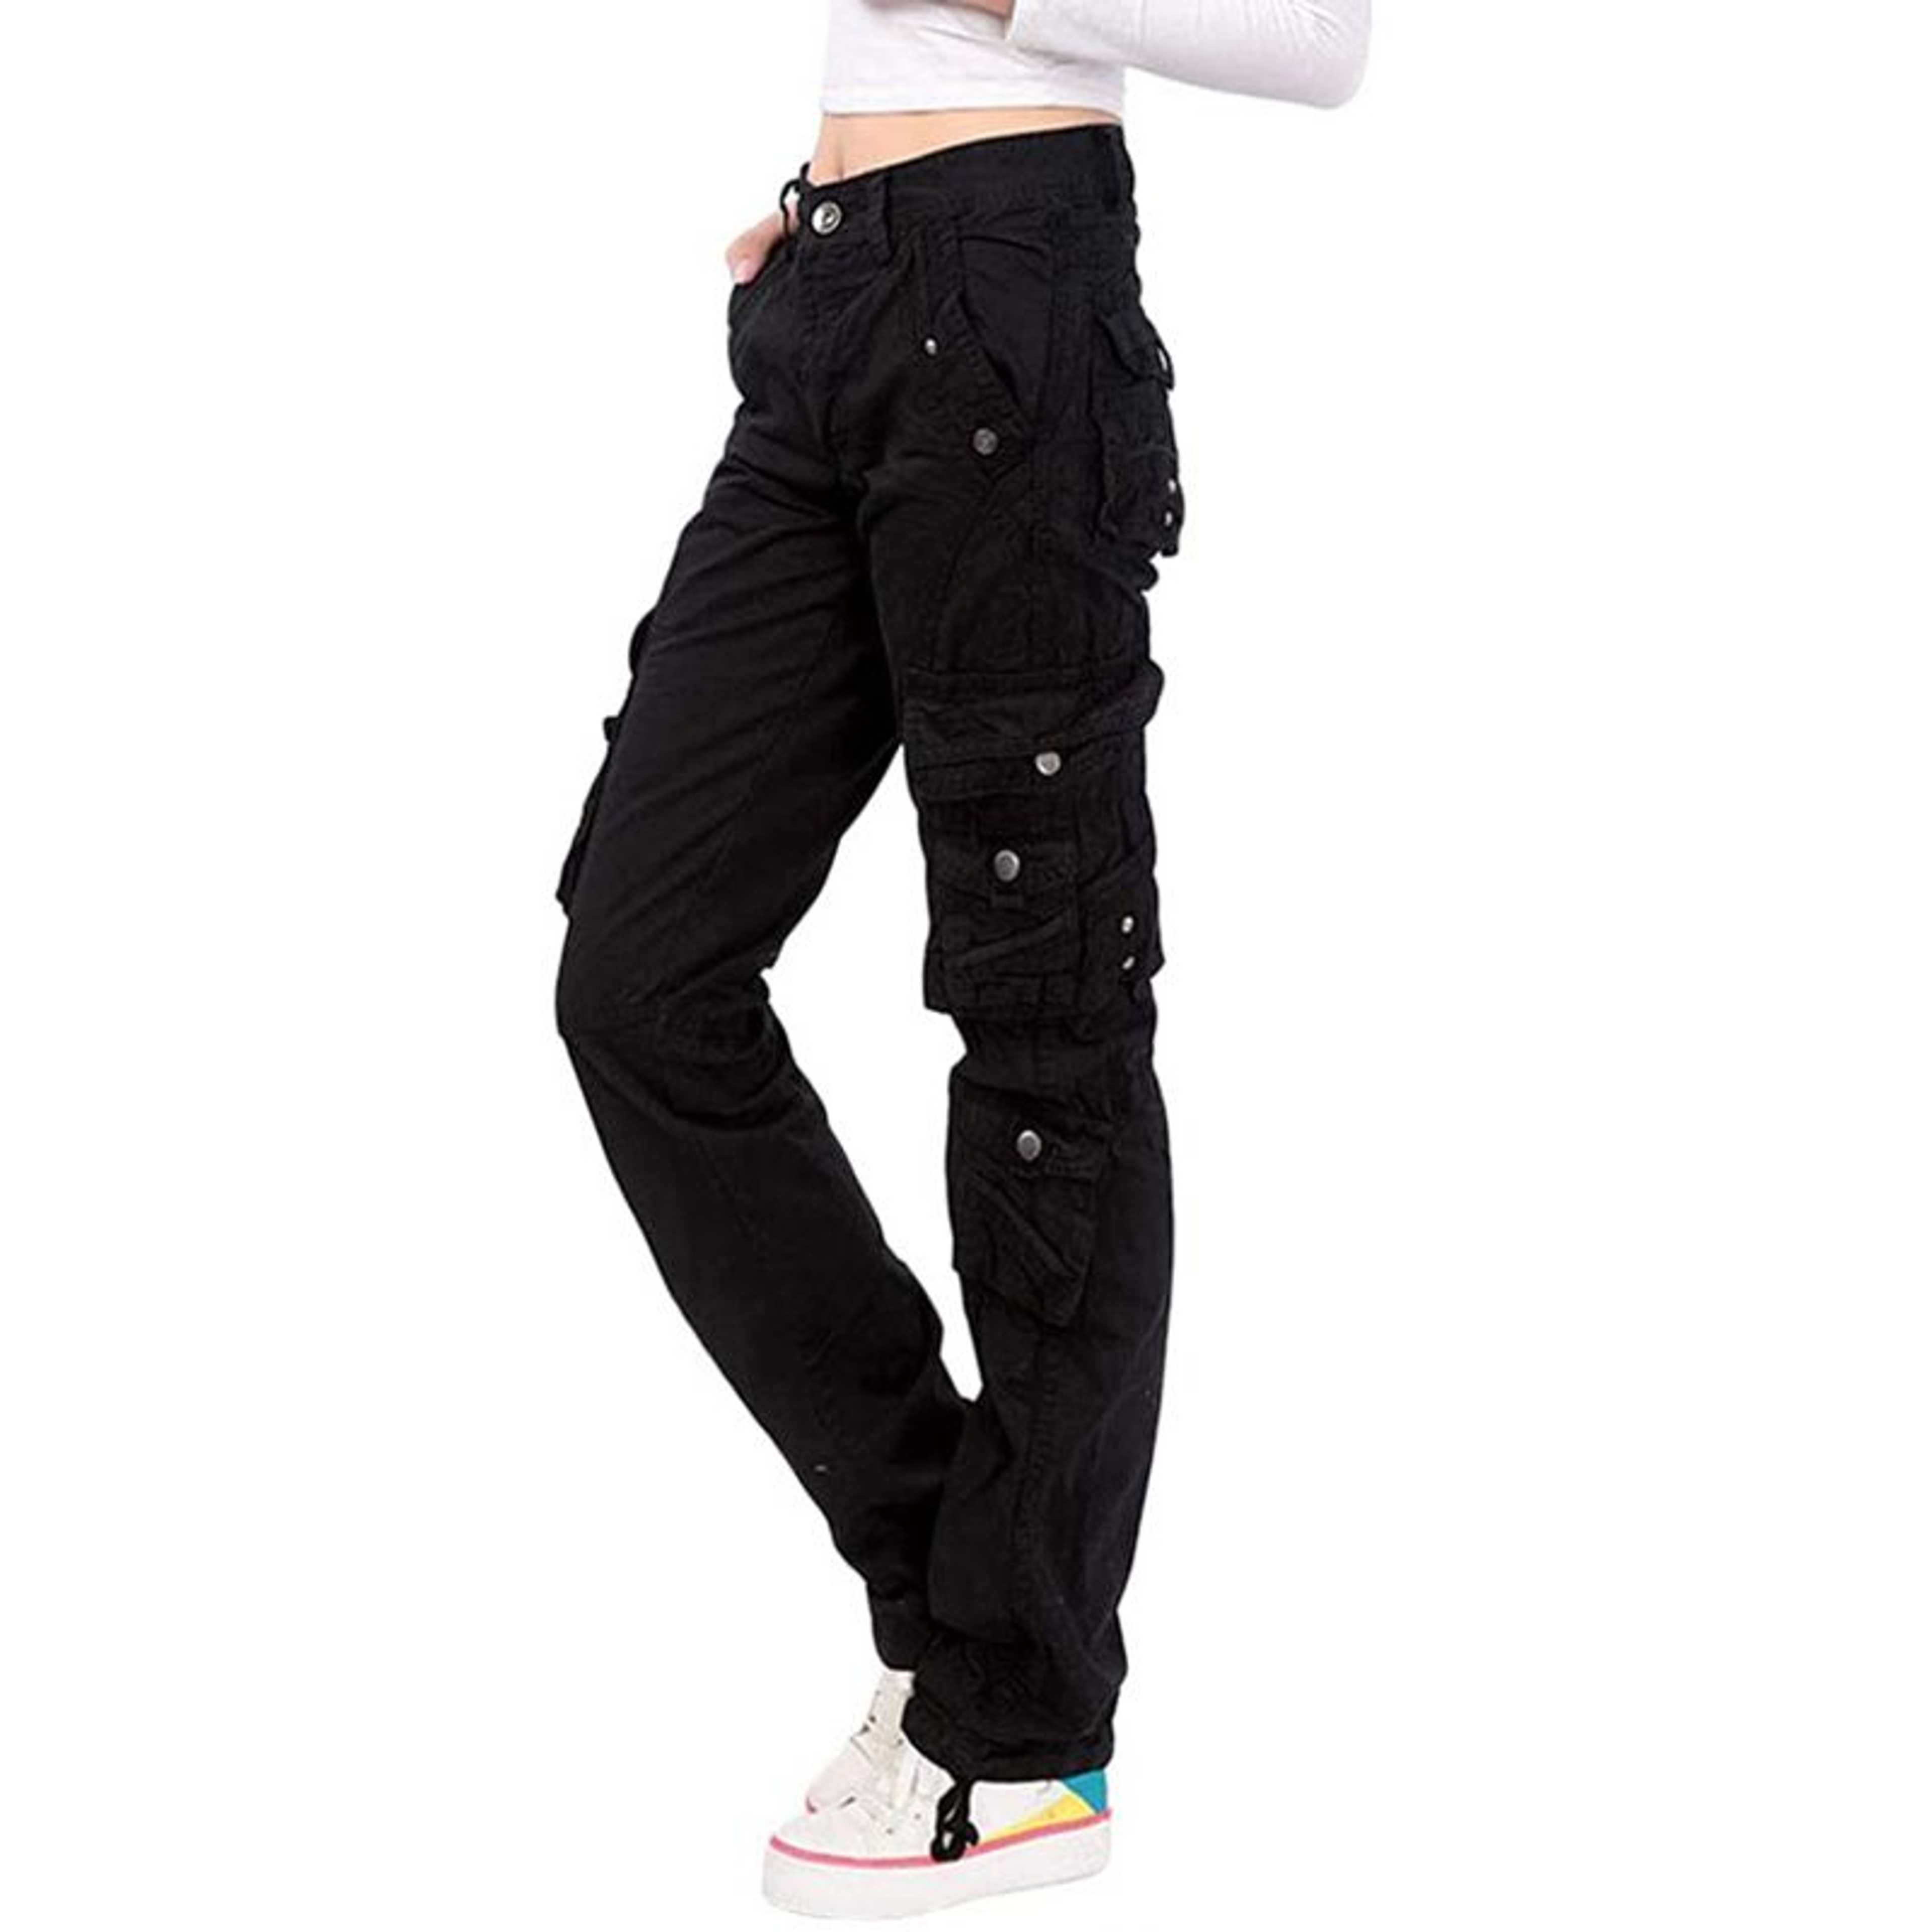 Rubahas Womens Cargo Trousers Ladies Trousers Jeans Pants